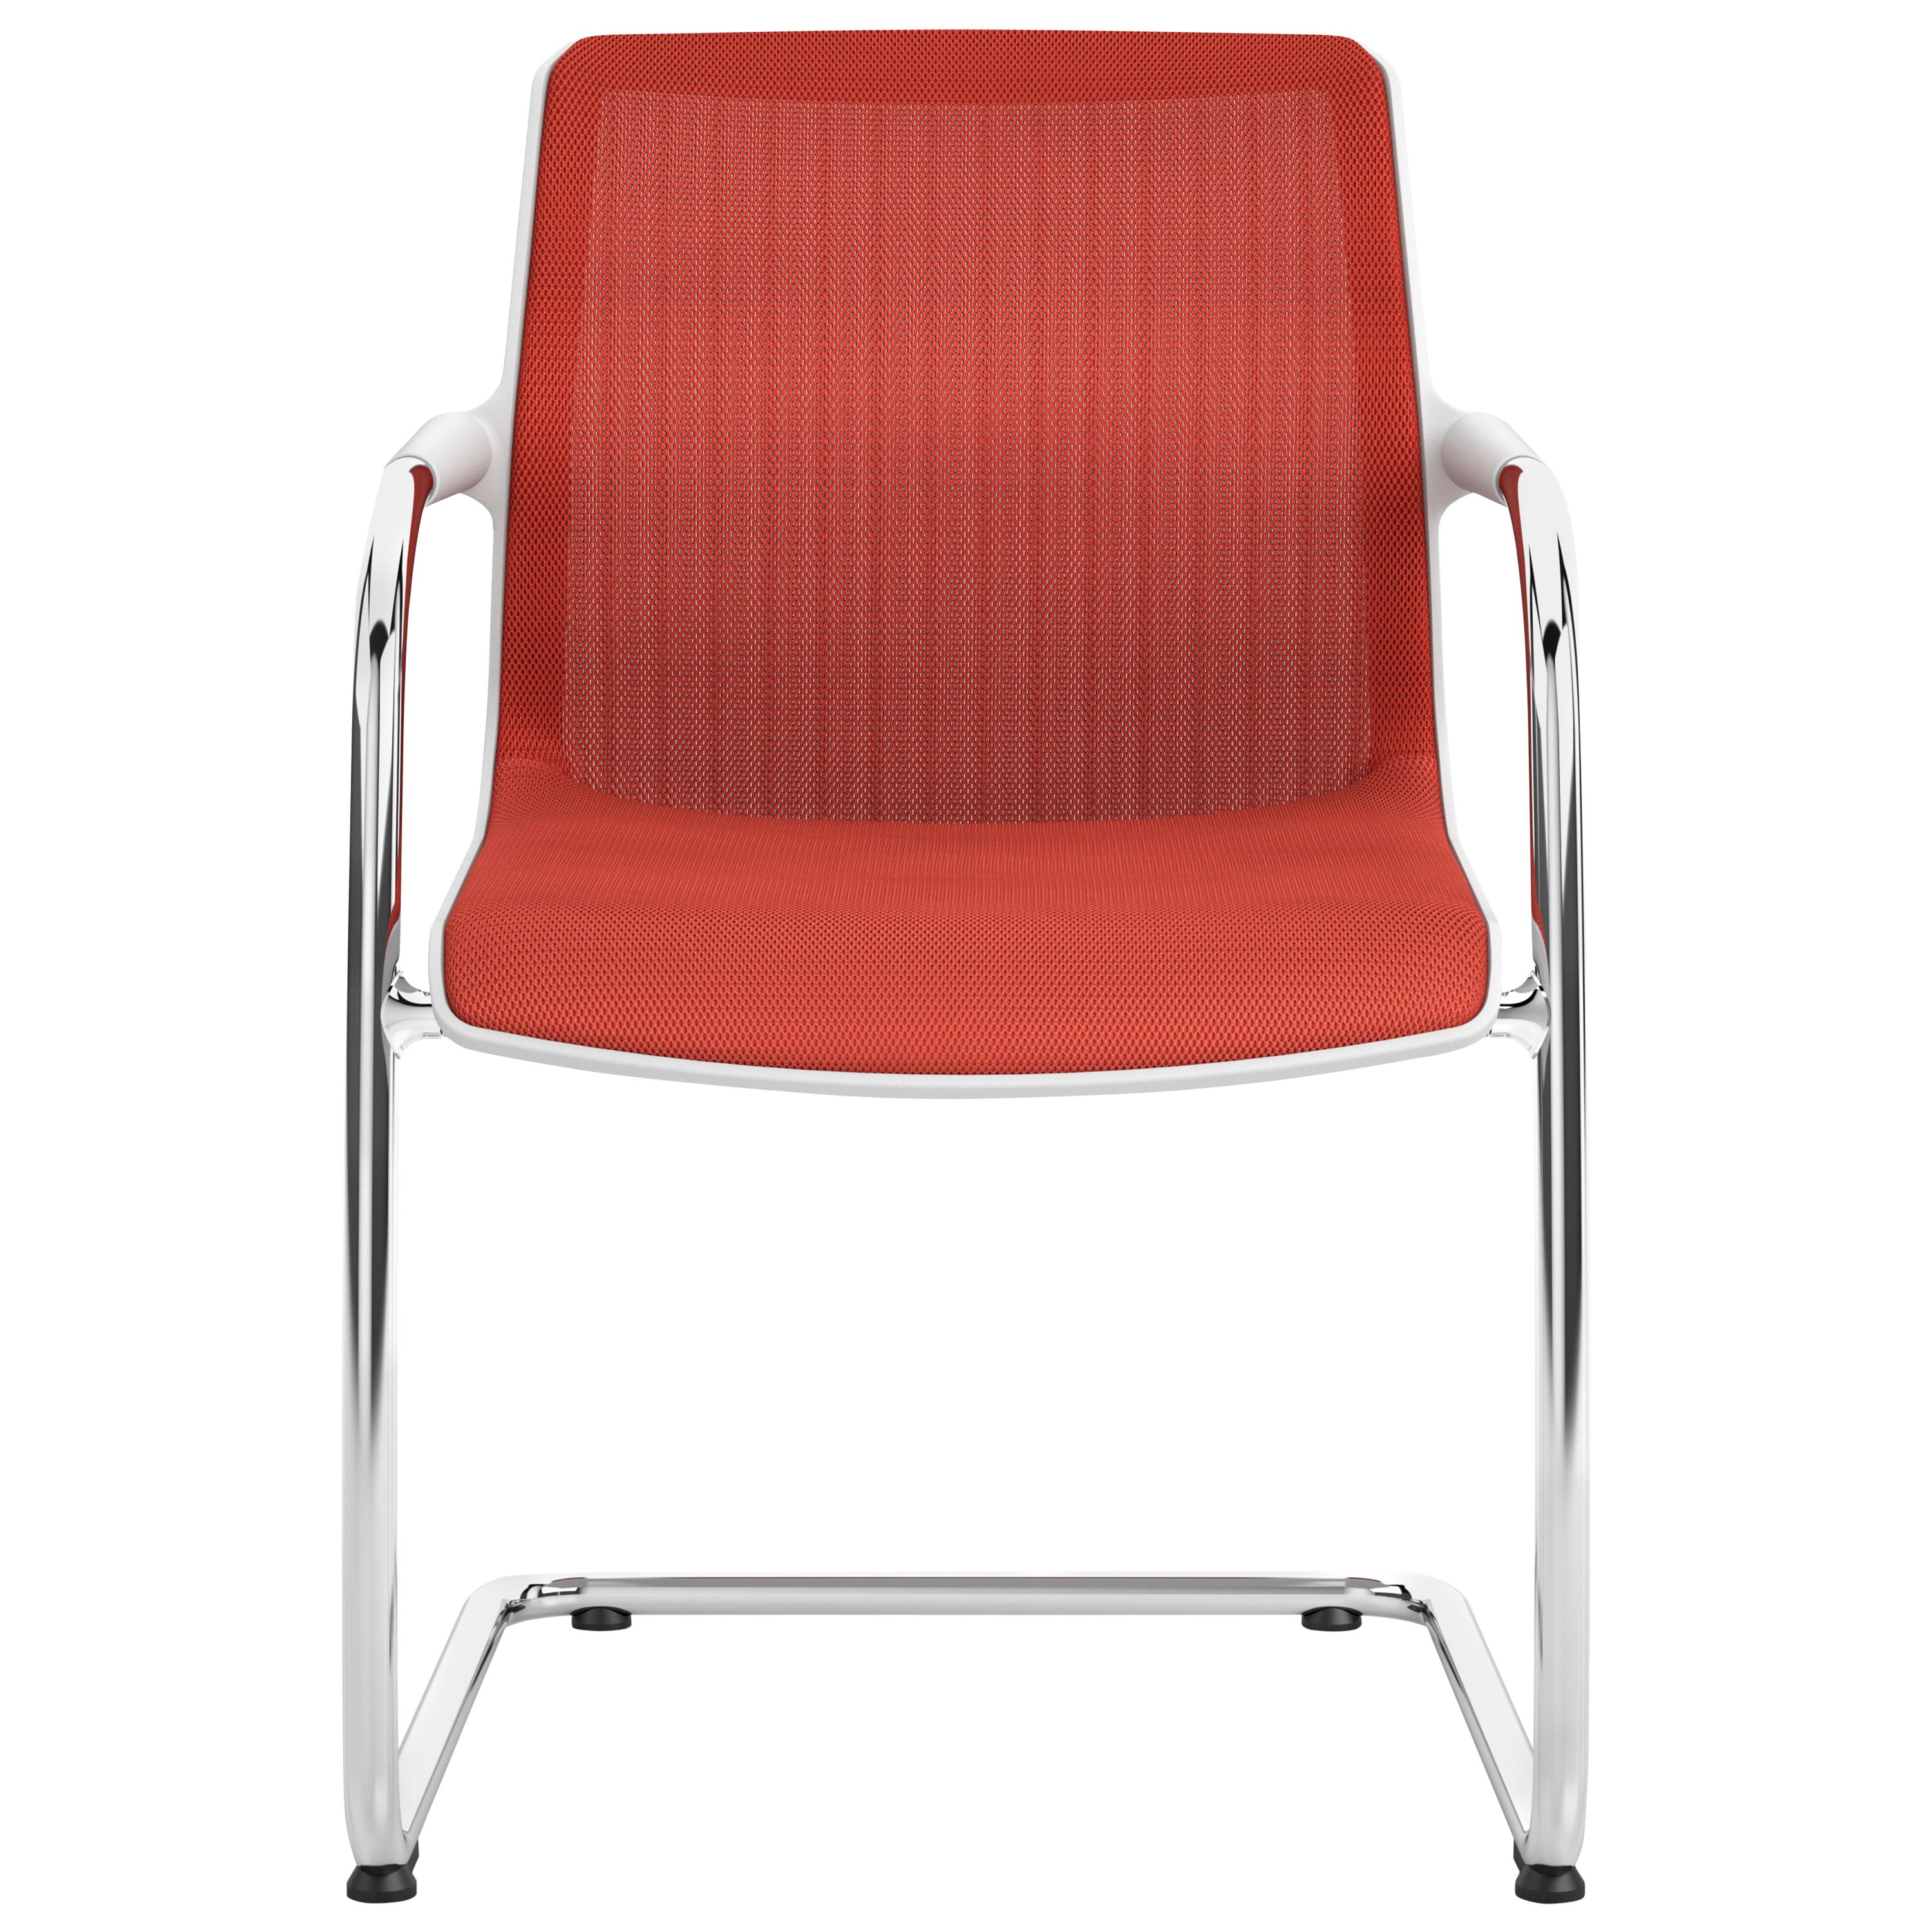 Vitra Unix Cantilever Stackable Chair in Brick Silk Mesh by Antonio Citterio im Angebot